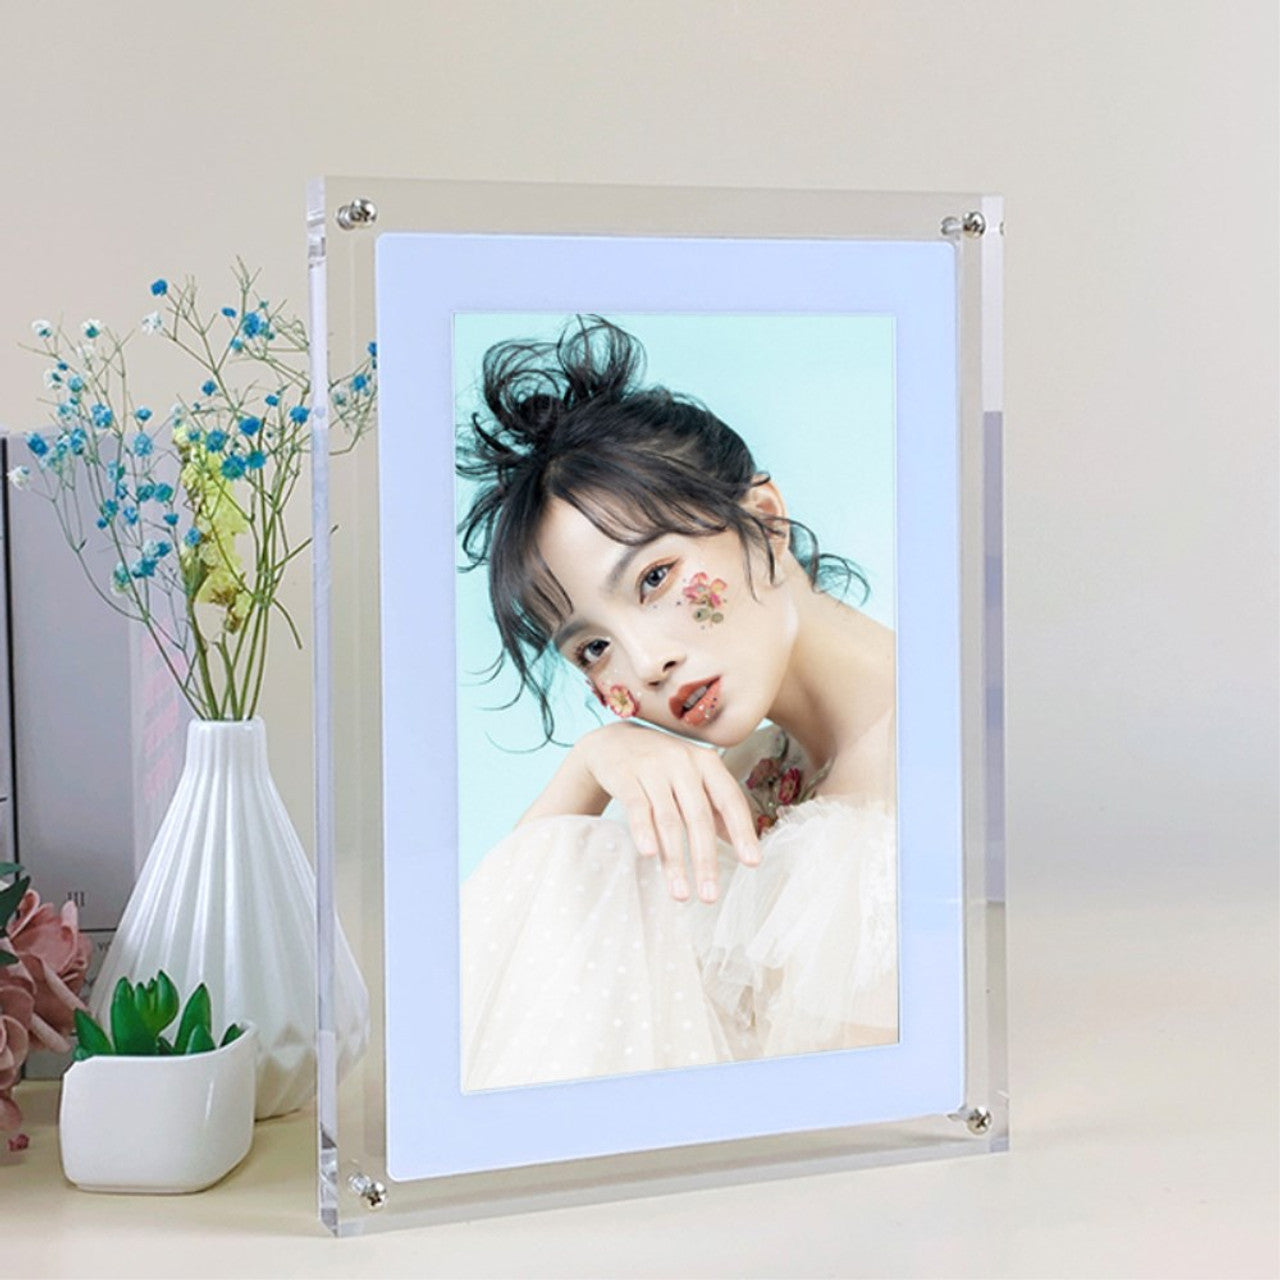 Digital Picture Frame Acrylic Video Player Digital Photo Frame Vertical Display With 1GB And Battery Type C Video Frame Gift For Loved